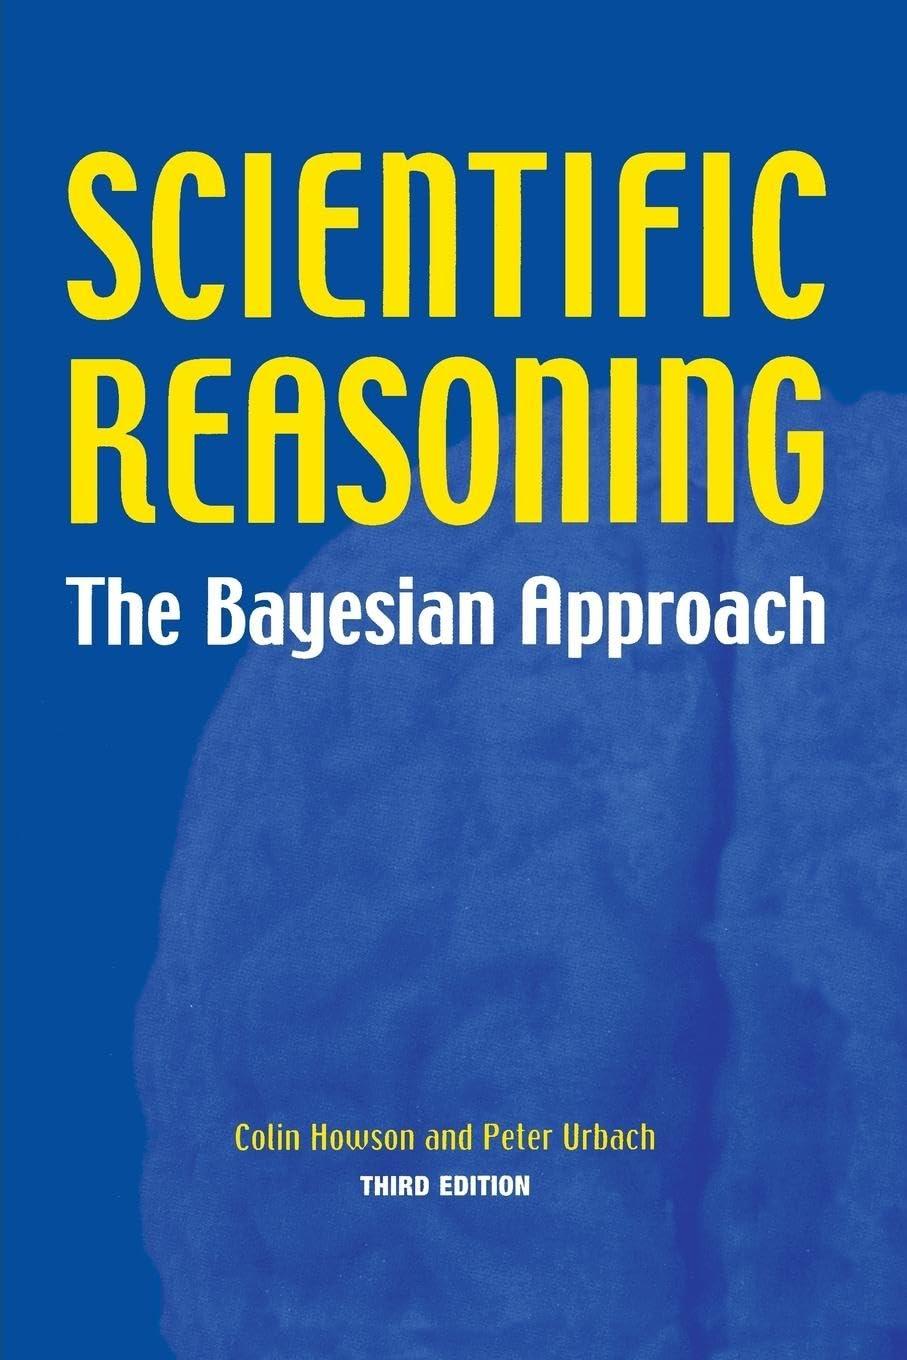 scientific reasoning the bayesian approach 1st edition colin howson, peter urbach 081269578x, 9780812695786